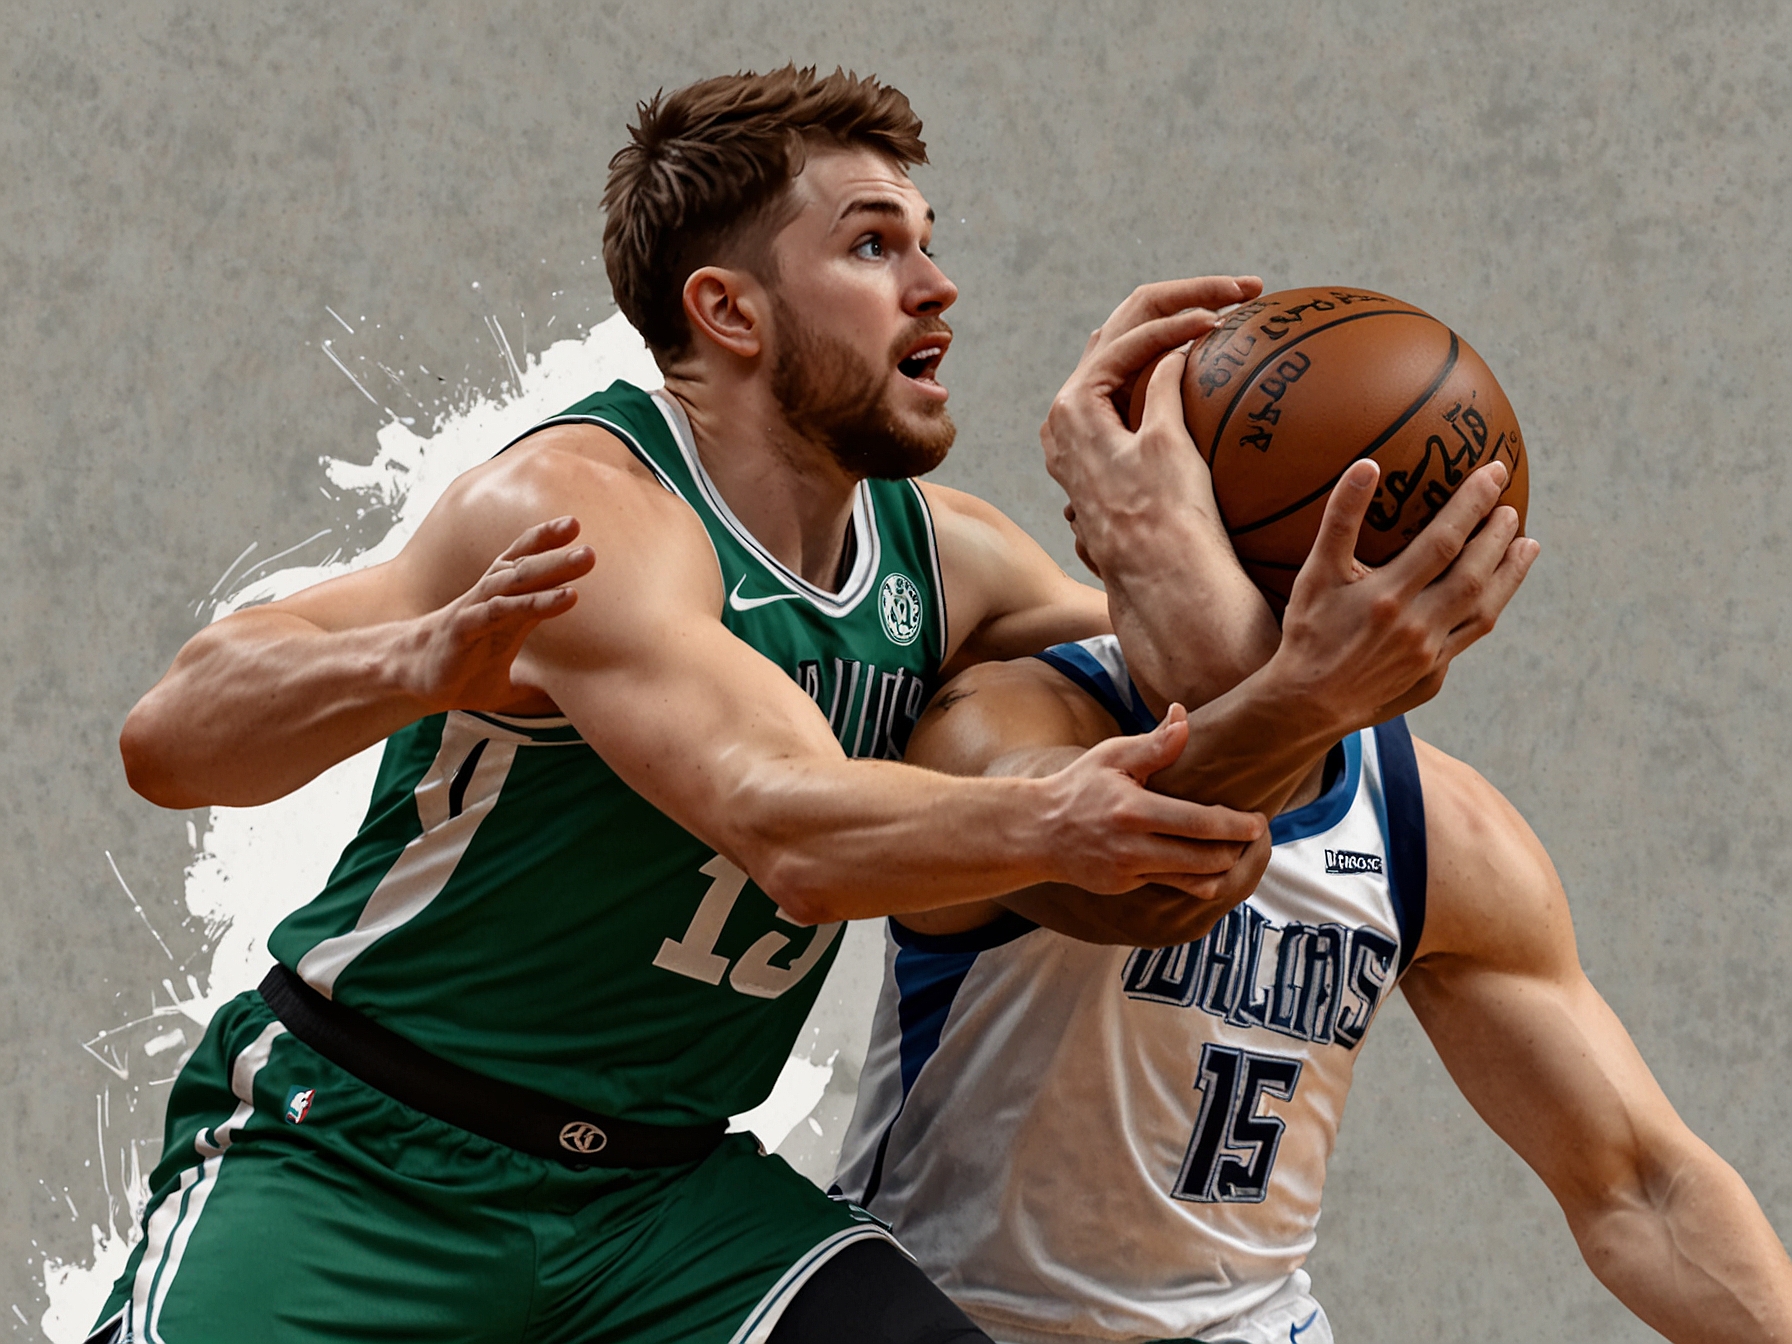 A tense moment as Luka Dončić of the Dallas Mavericks drives to the basket against Boston Celtics' Marcus Smart, showcasing the physical and strategic battle of Game 5 of the 2024 NBA Finals.